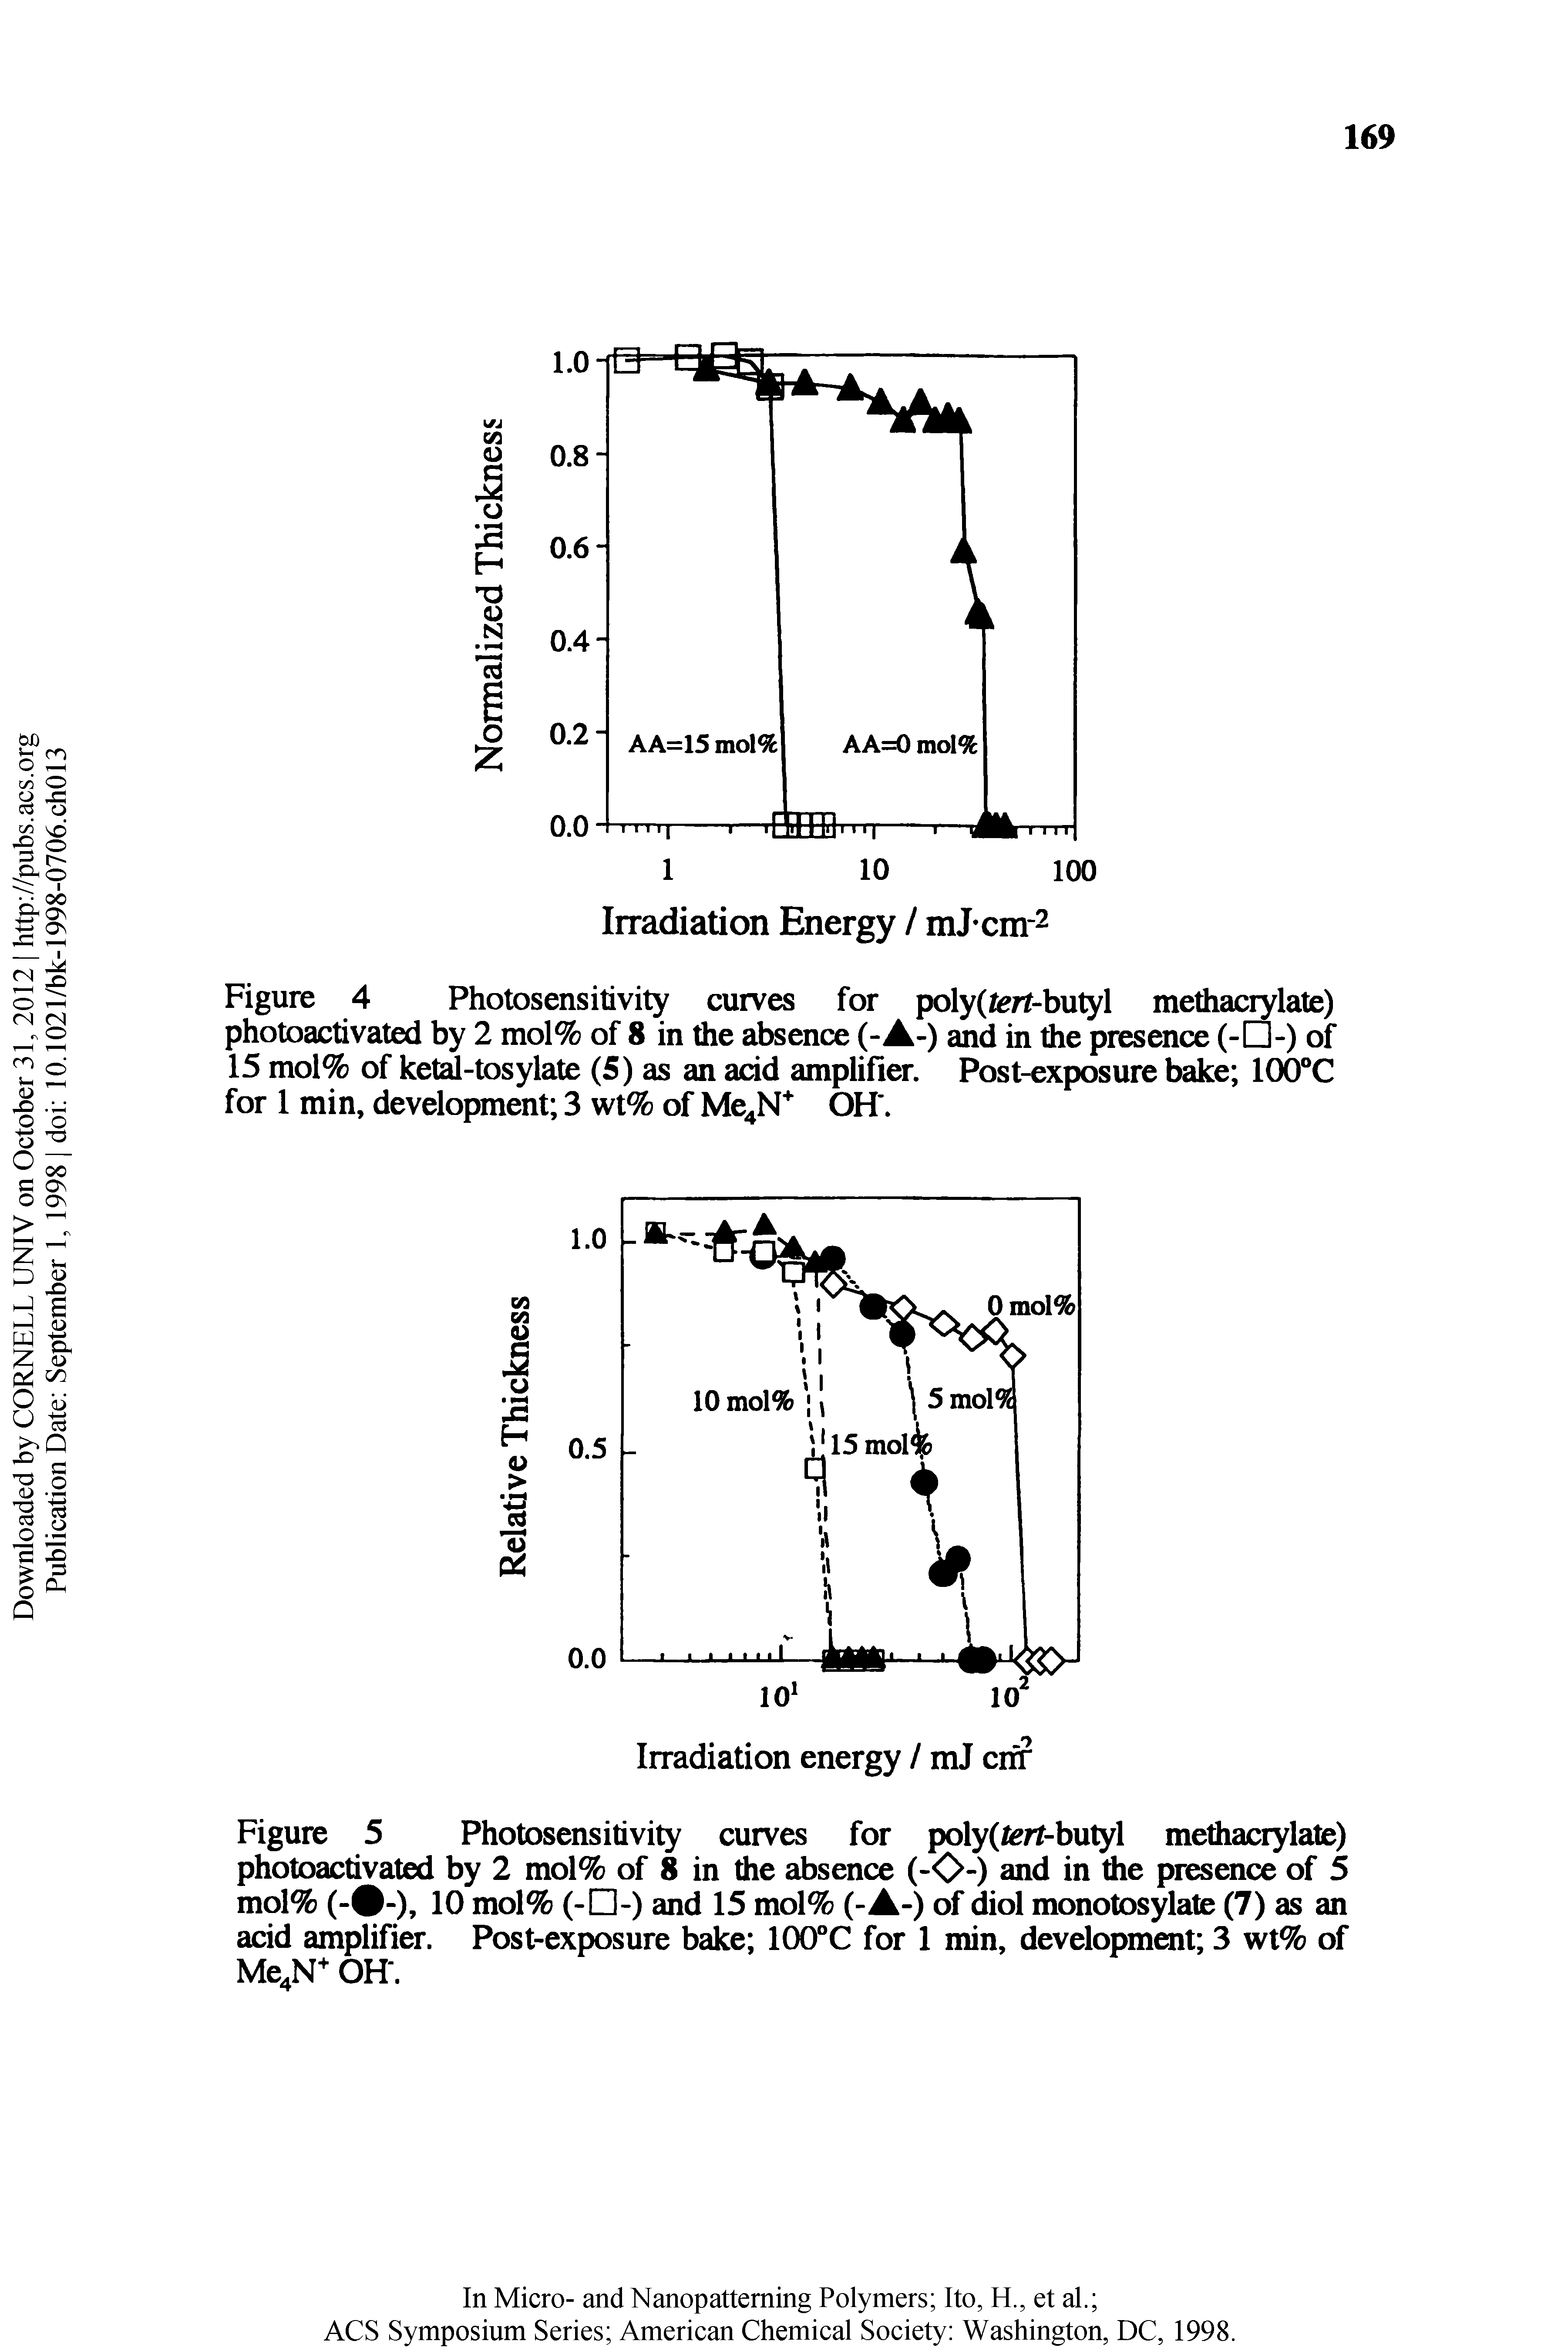 Figure 5 Photosensitivity curves for poly(ter/-butyl methacrylate) photoactivated by 2 mol% of 8 in the absence (-0-) and in the presence of 5 mol% (- -) 10 niol% (- -) and 15 mol% (-A-) of diol monotosylate (7) as an acid amplifier. Post-exposure bake 100°C for 1 min, development 3 wt% of Me N OH.